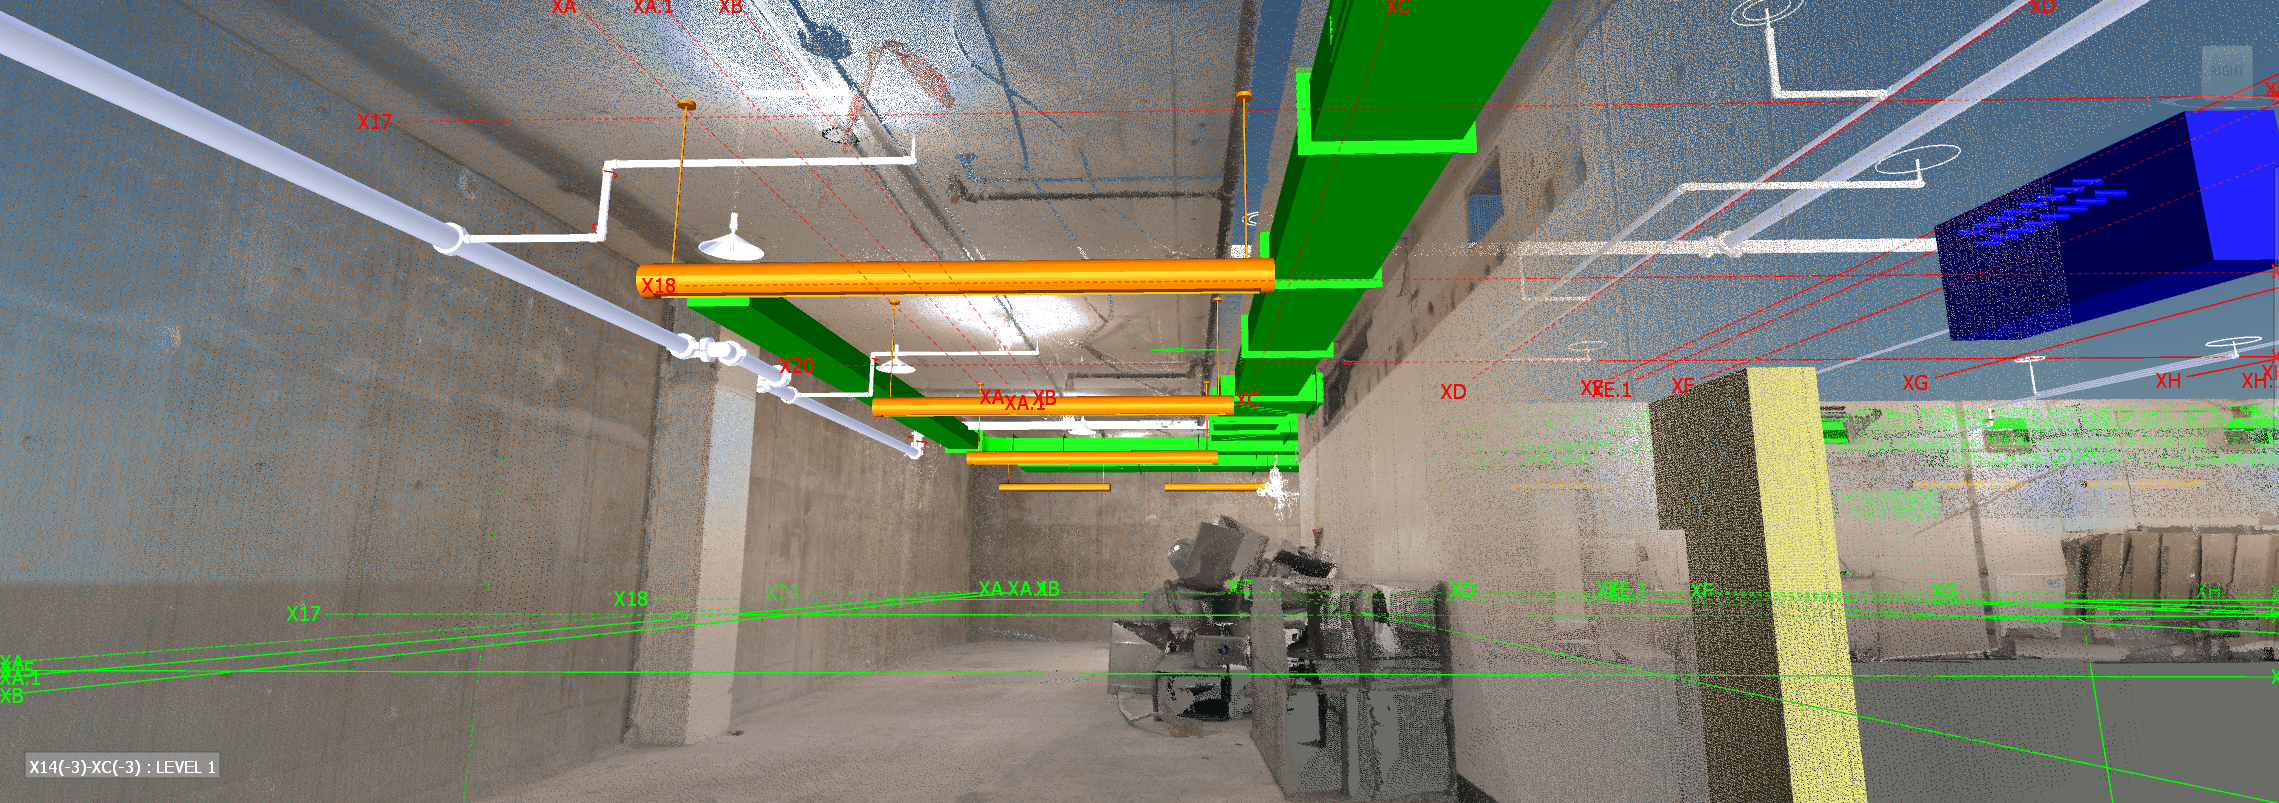 df_longwood_hallway_with_point_cloud_and_meps